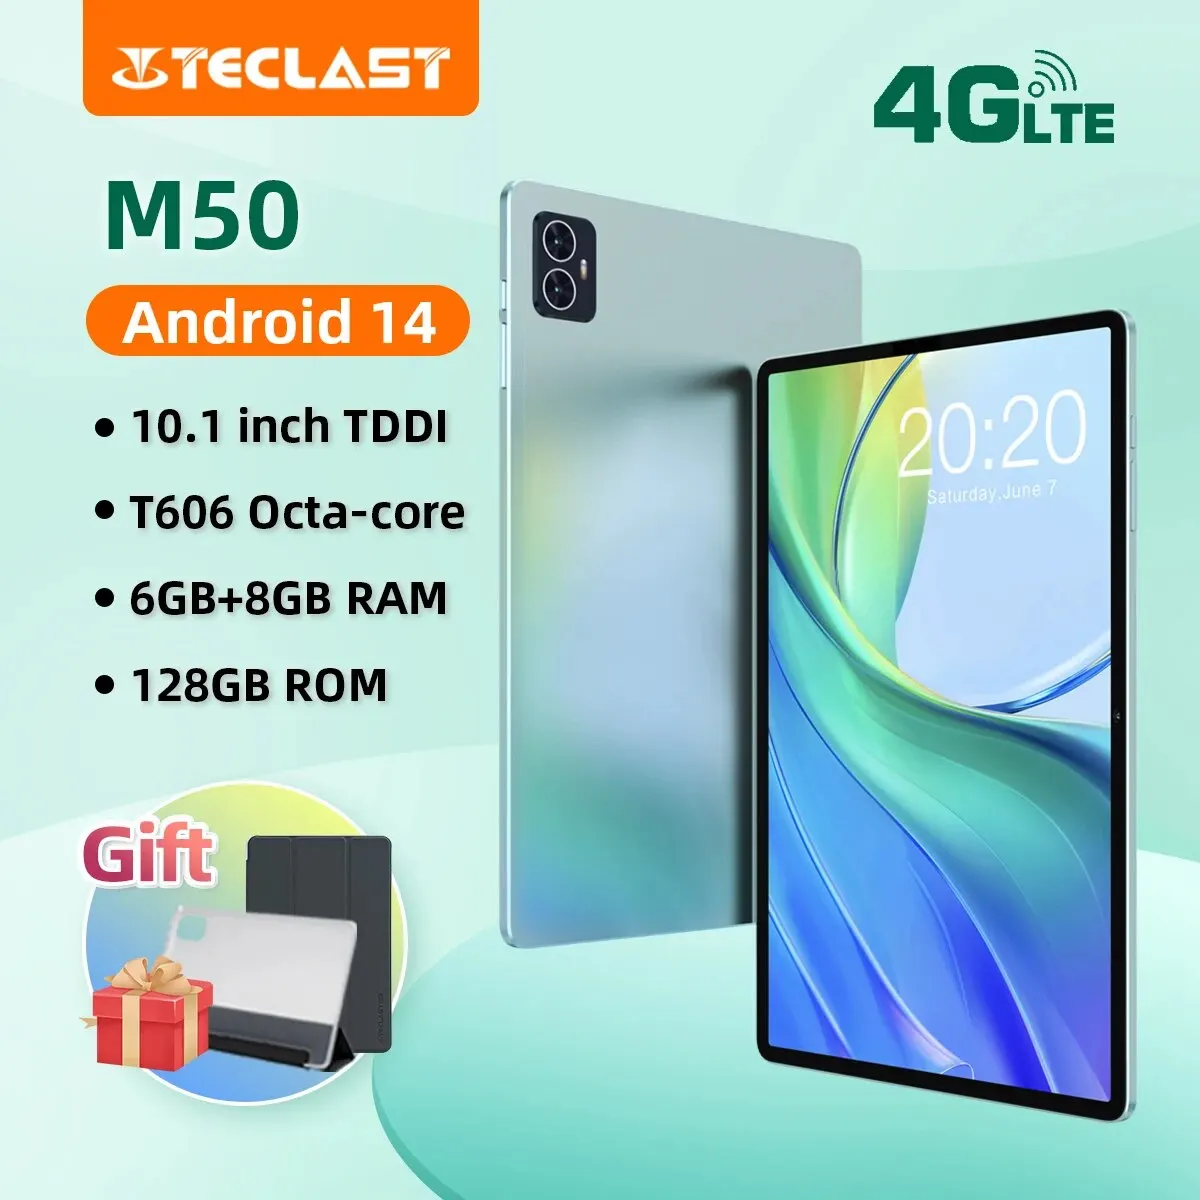 Teclast M50 Android 14 Tablet T606 8-core 6GB+8GB RAM 128GB ROM 10.1'' Incell Fully Laminated 4G Network GPS Widevine L1 8mm Slim